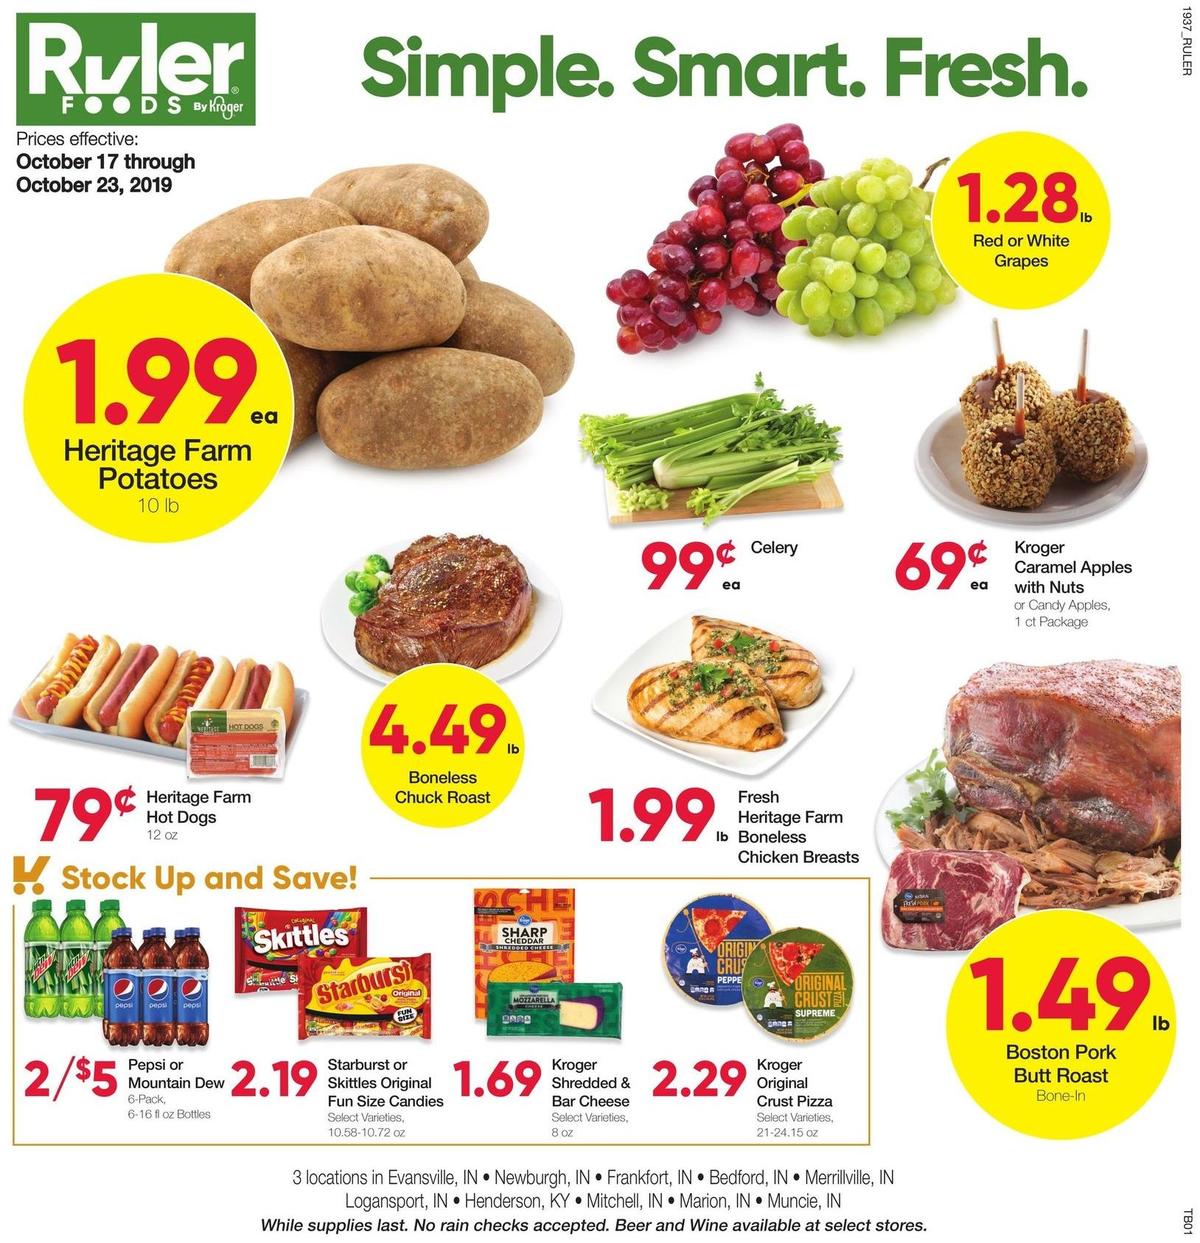 Ruler Foods Best Offers And Special Buys From October 17